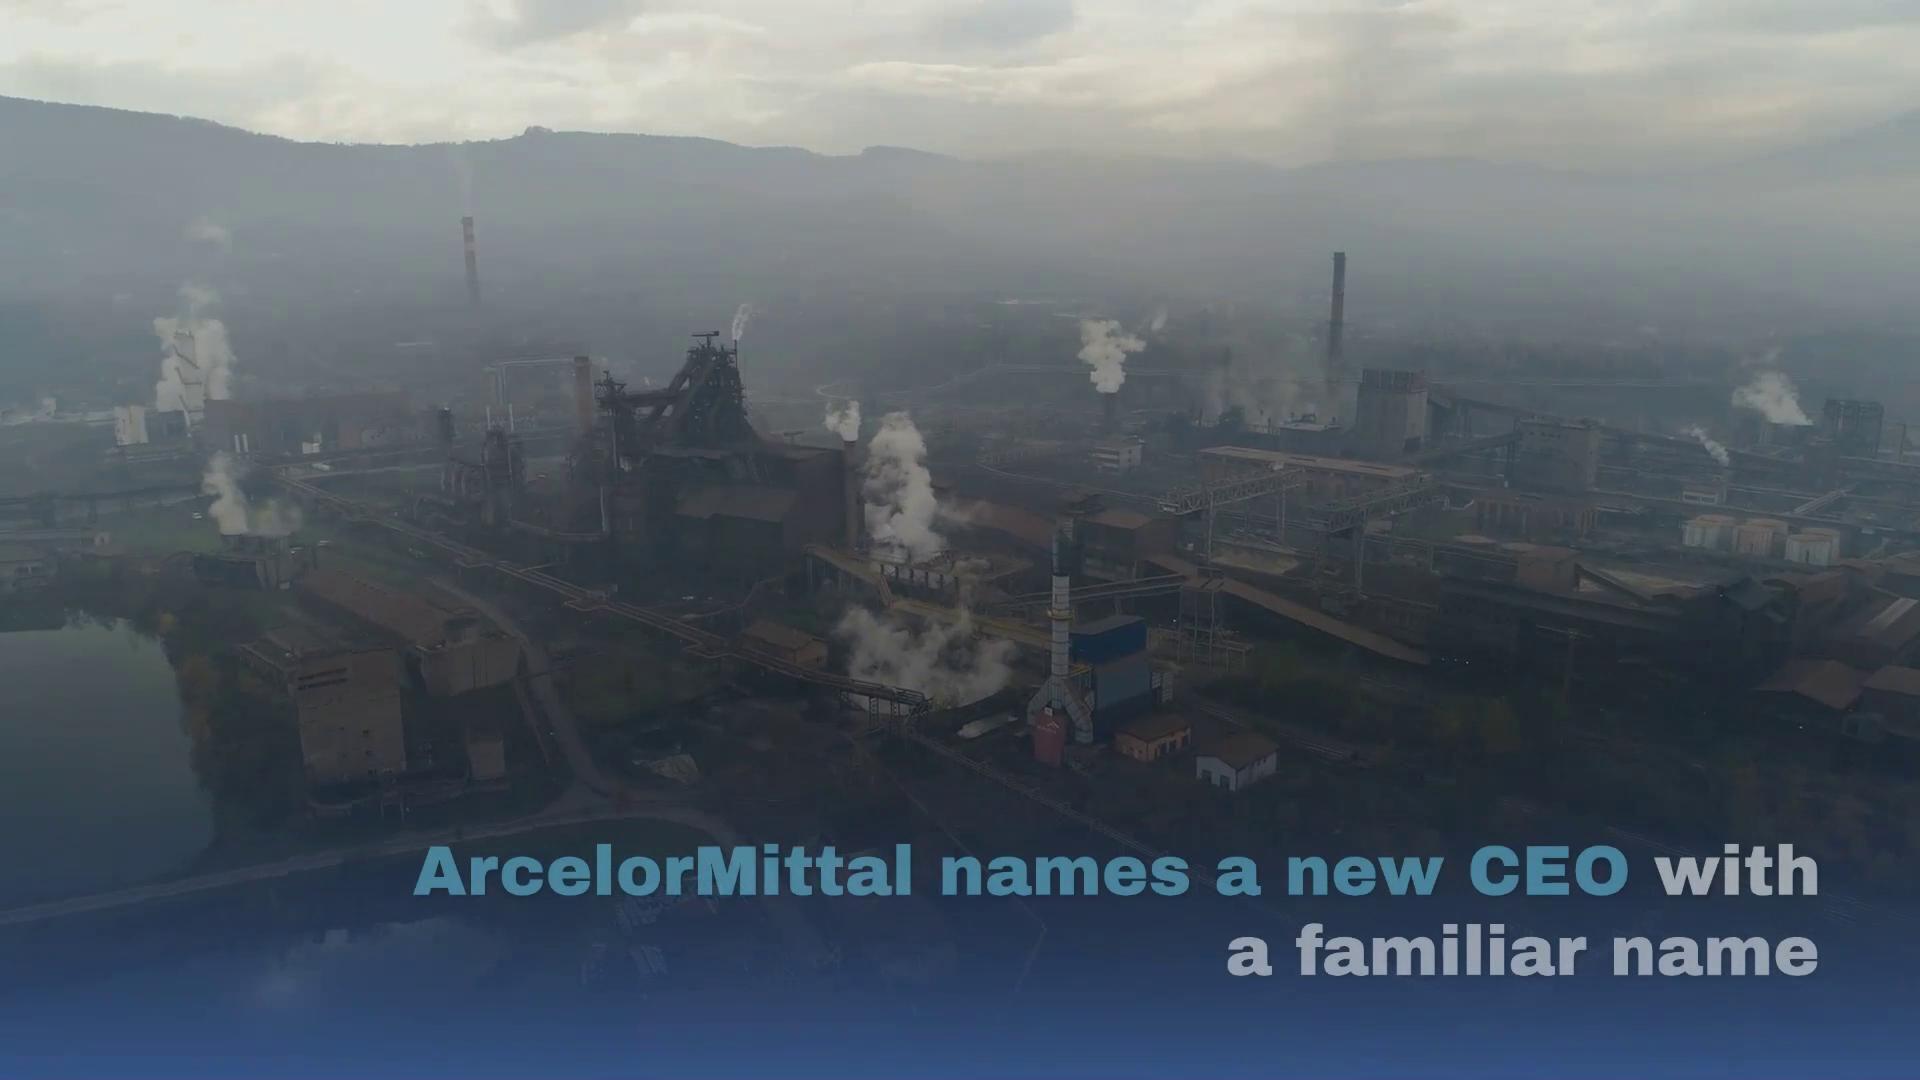 News: ArcelorMittal appoints Aditya Mittal as chief executive